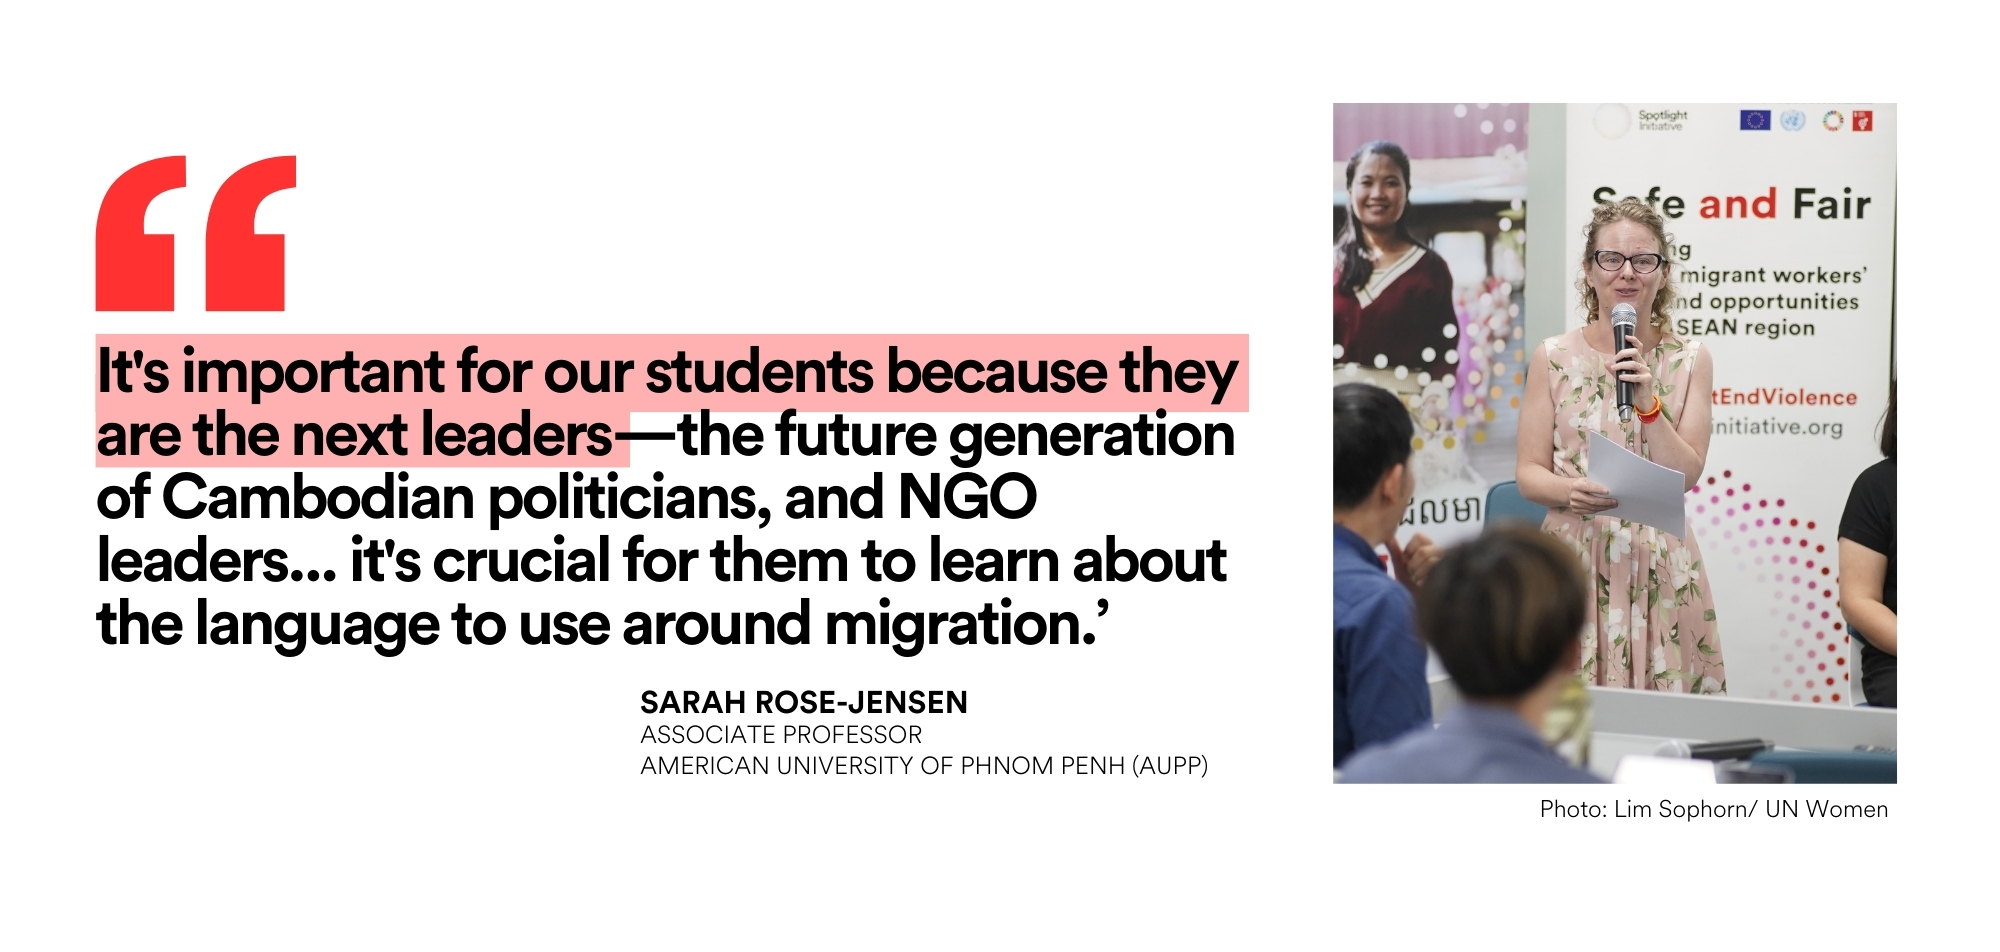 Sarah-Rose Jensen, Associate Professor at AUPP, saw the event as critical for her students, stating, “It's important for our students because they are the next leaders—the future generation of Cambodian politicians, NGO leaders, and individuals running agencies like ILO. 